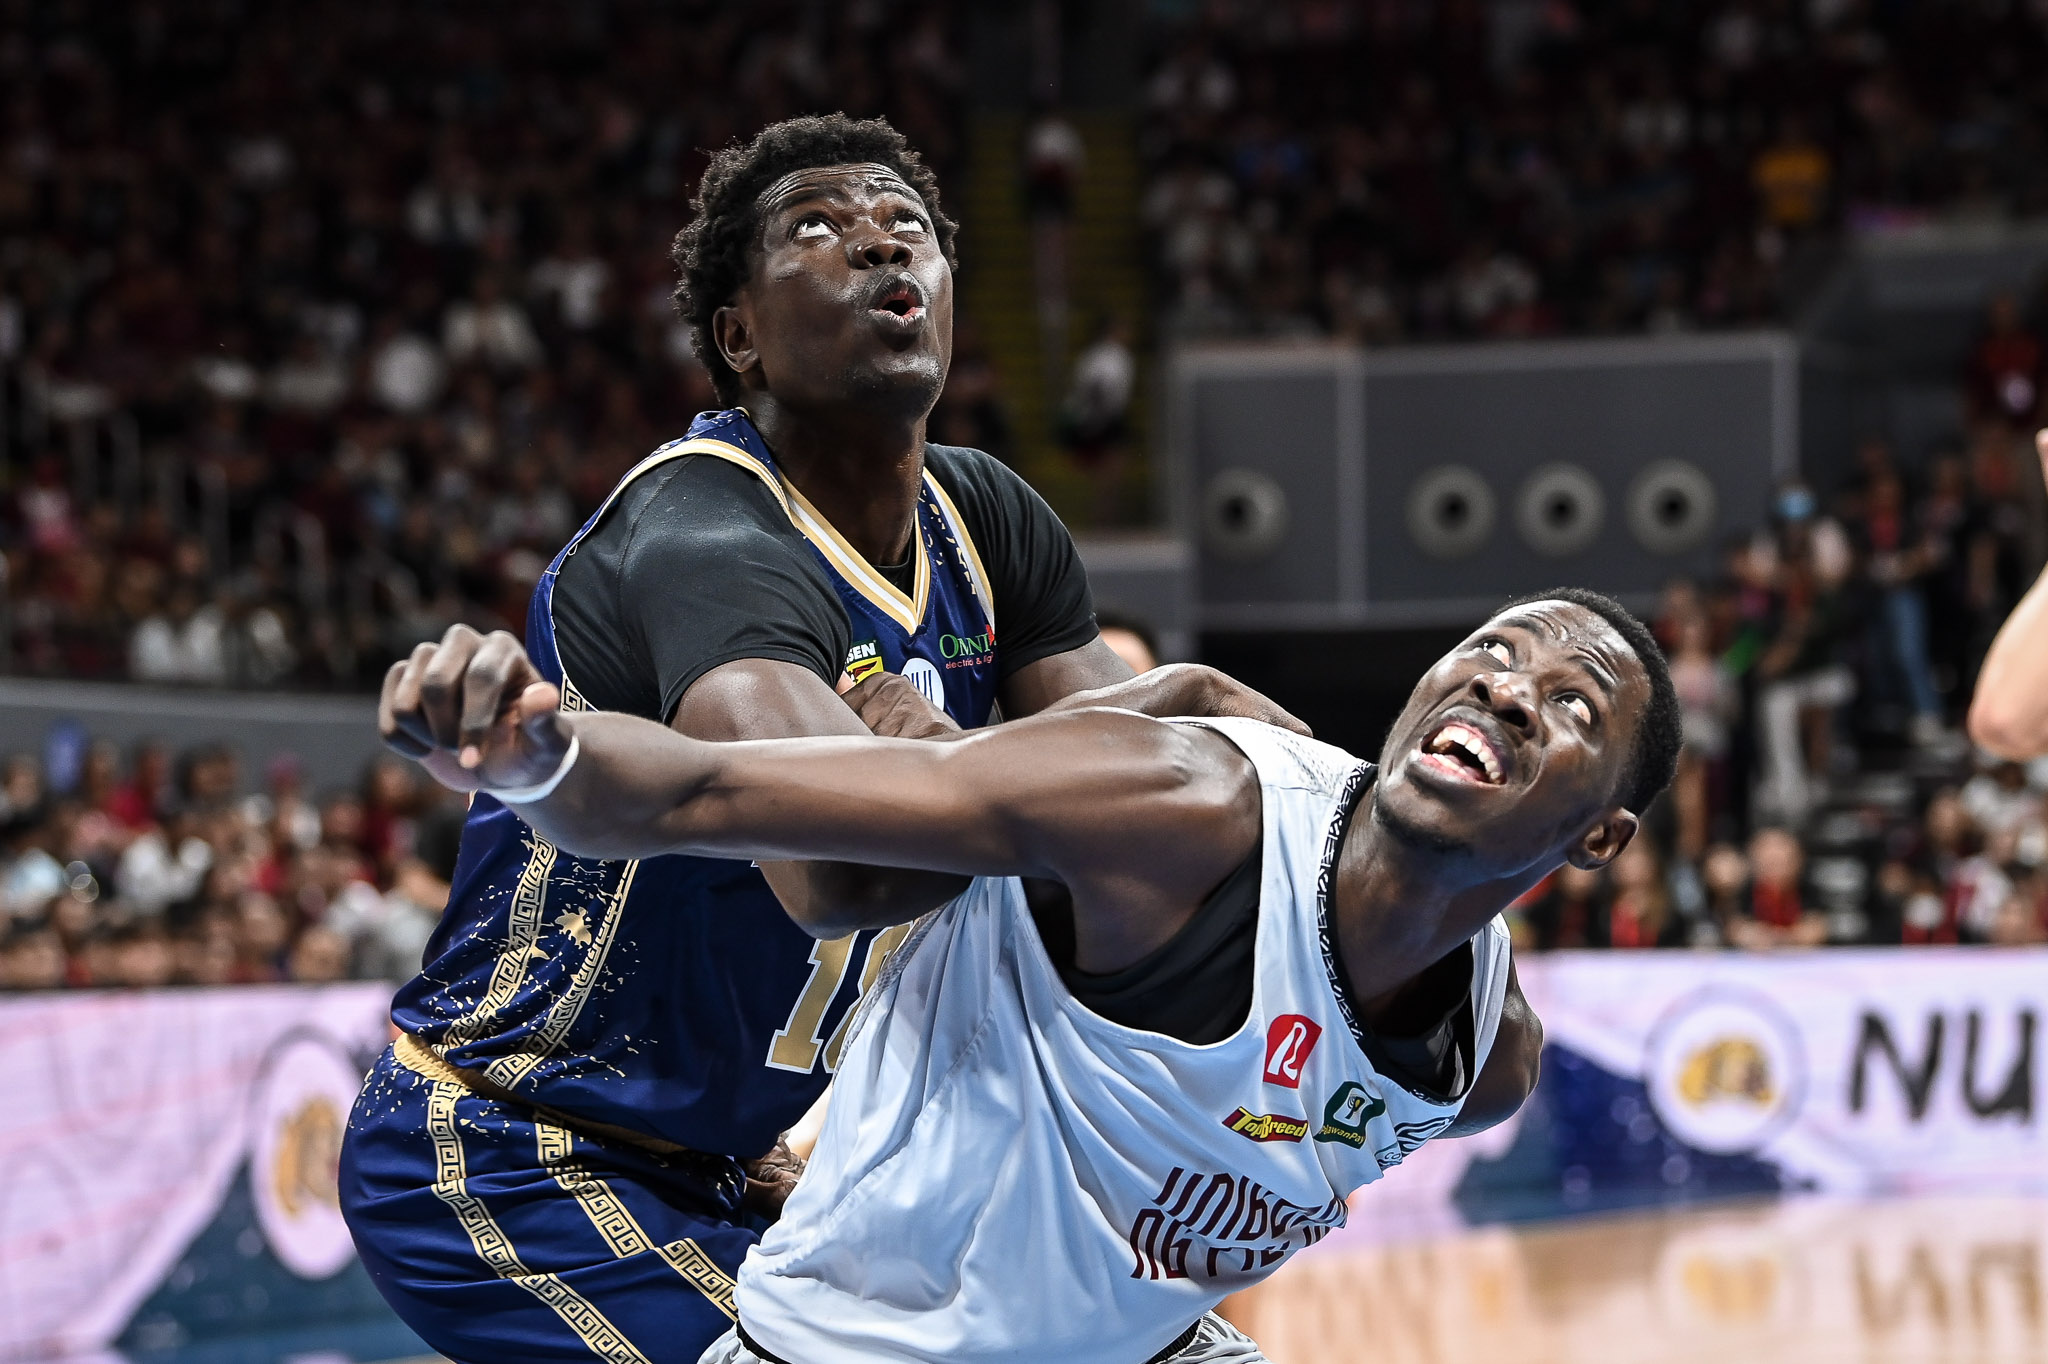 UAAP86-MBB-Omar-John-Malick-Diouf-4493 UAAP 86 MBB: UP dominates NU anew, seals historic top seed Basketball News NU UAAP UP  - philippine sports news